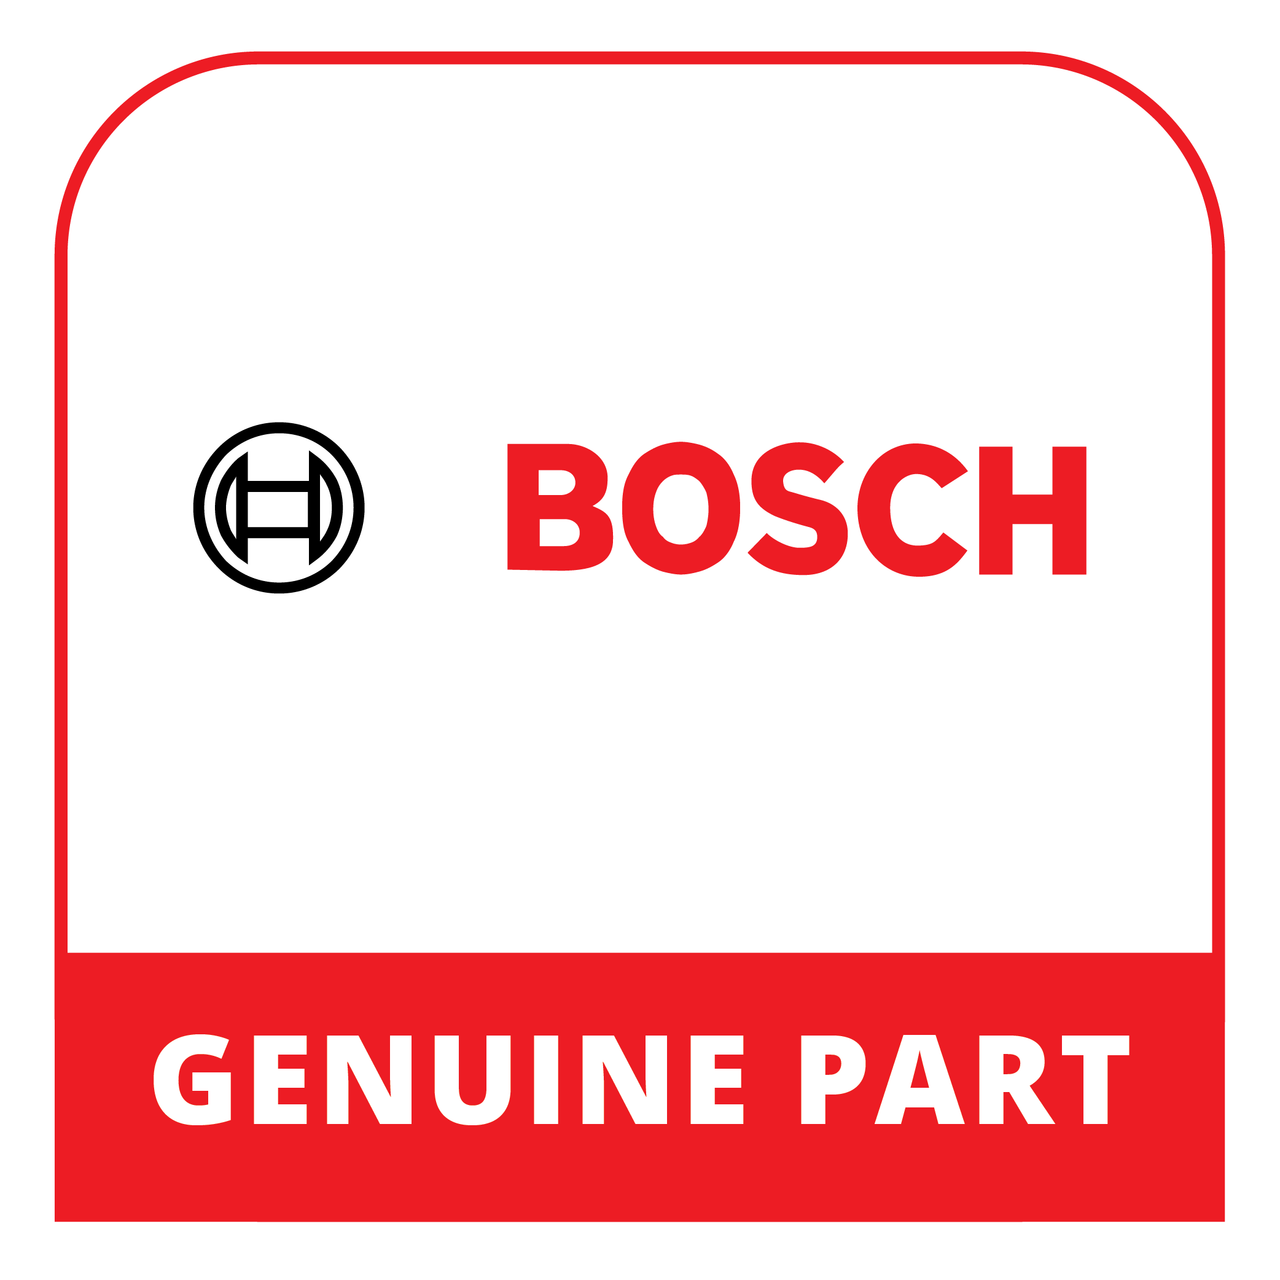 Bosch 00420271 - Clamping Piece - Genuine Bosch (Thermador) Part